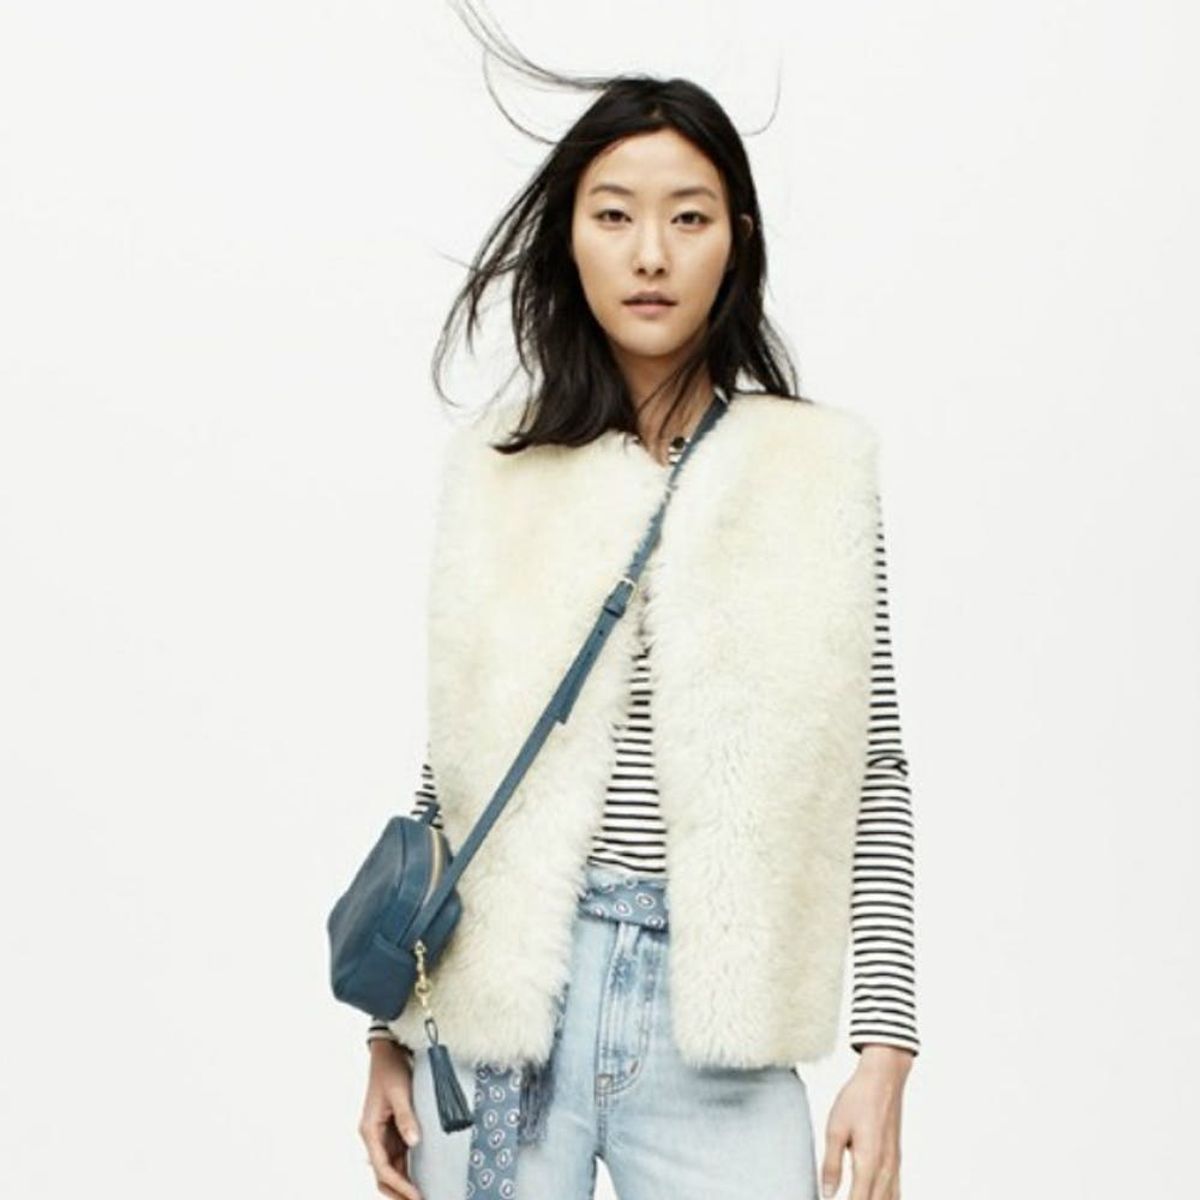 These 9 Looks from Madewell’s New Collection Will Have You Excited for Fall